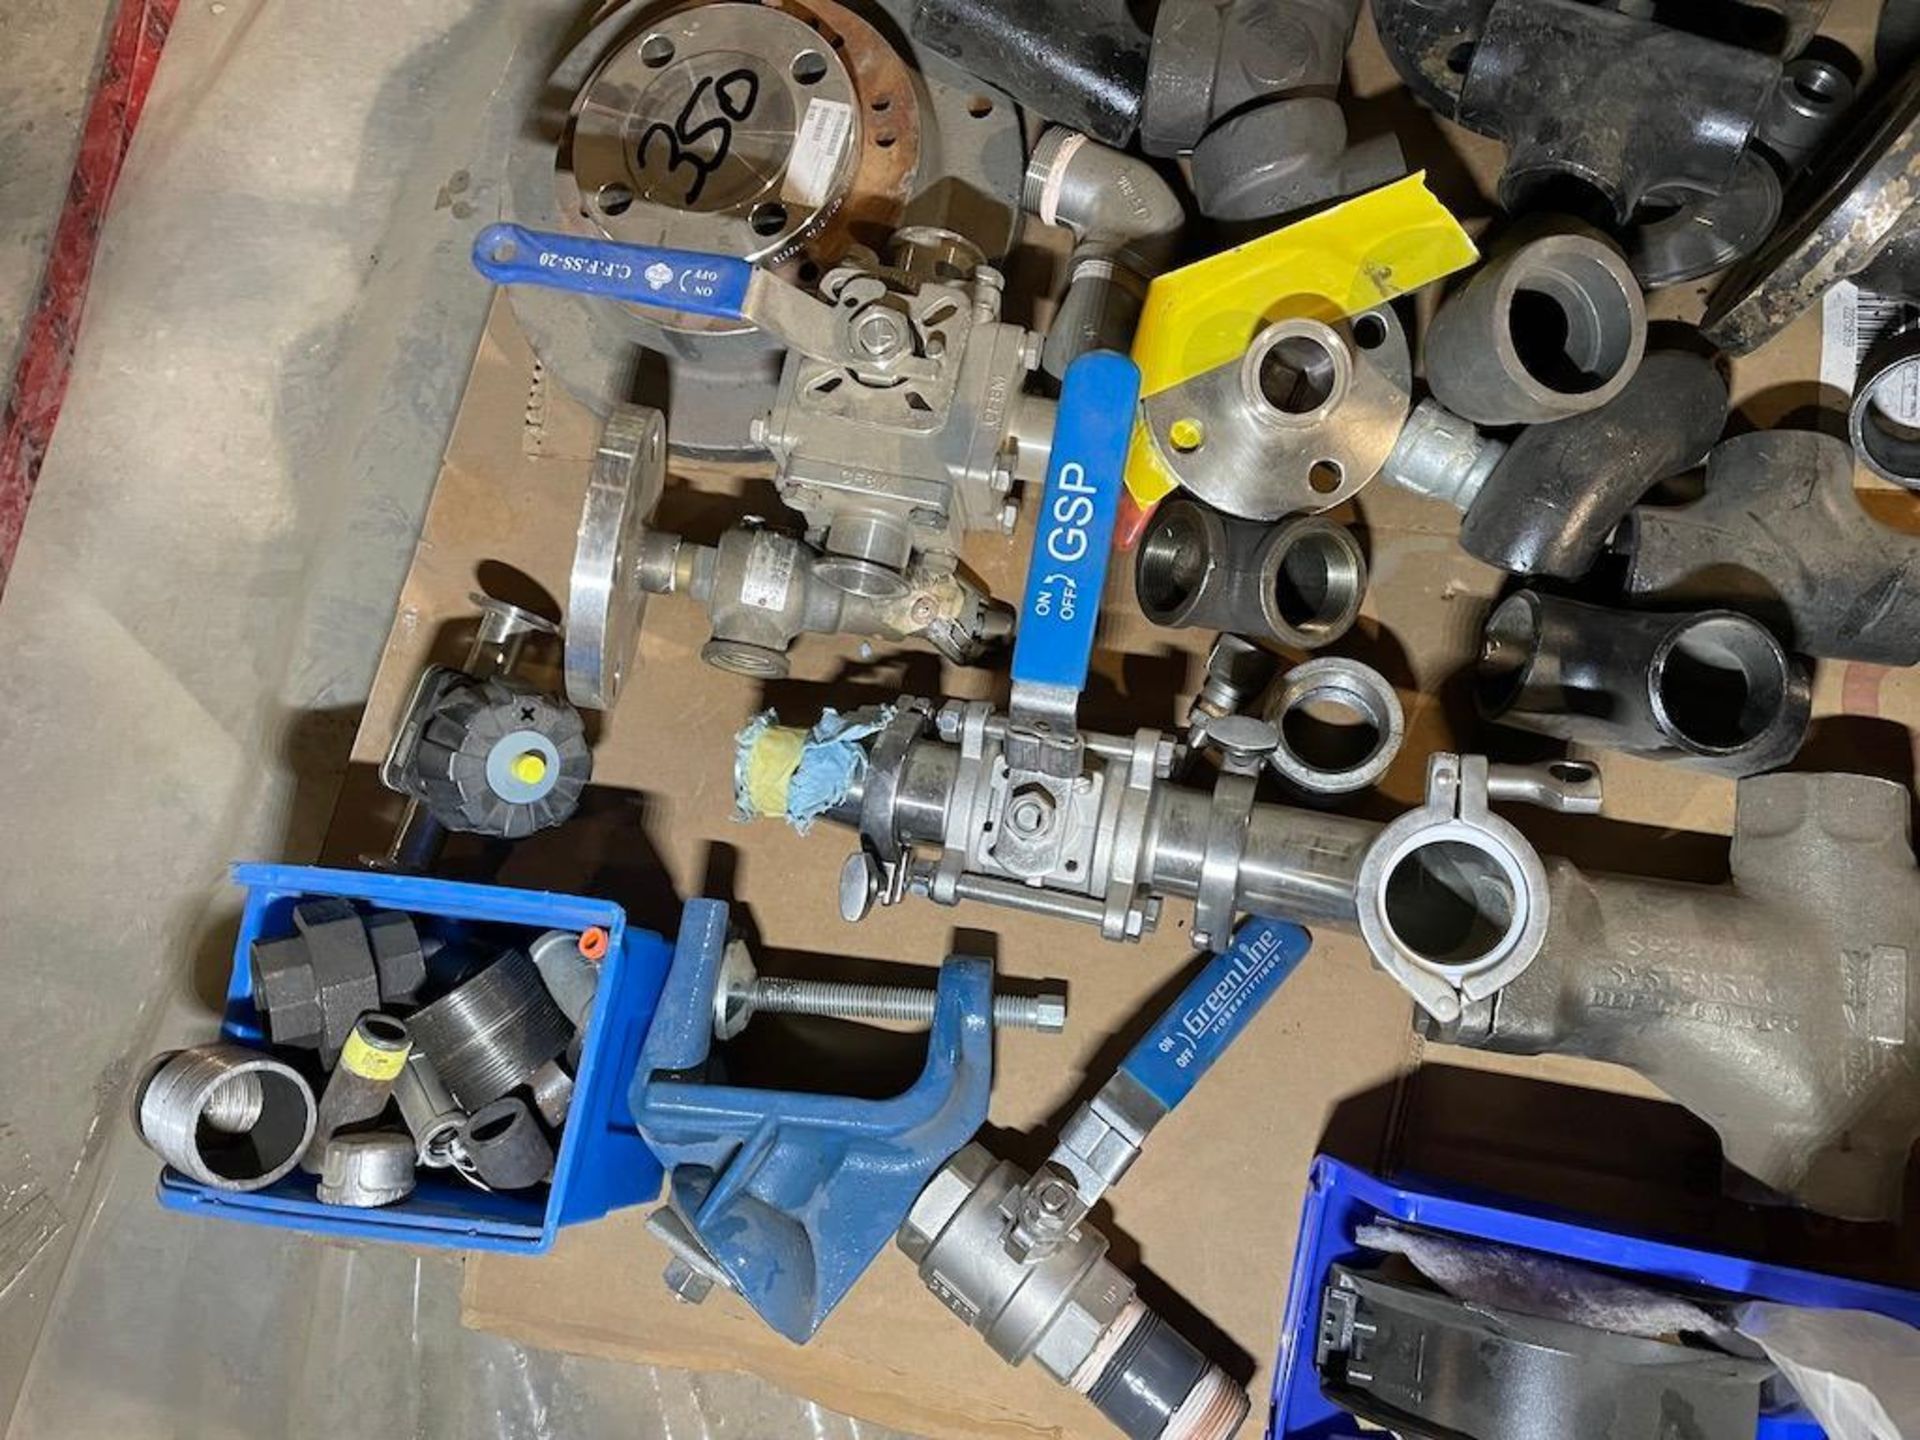 (3) SKIDS ASSORTED PNEUMATIC ACTUATORS, VALVES, FITTINGS, COMPONENTS, KNIFE VALVE, JOINTS, METERS, C - Image 11 of 22